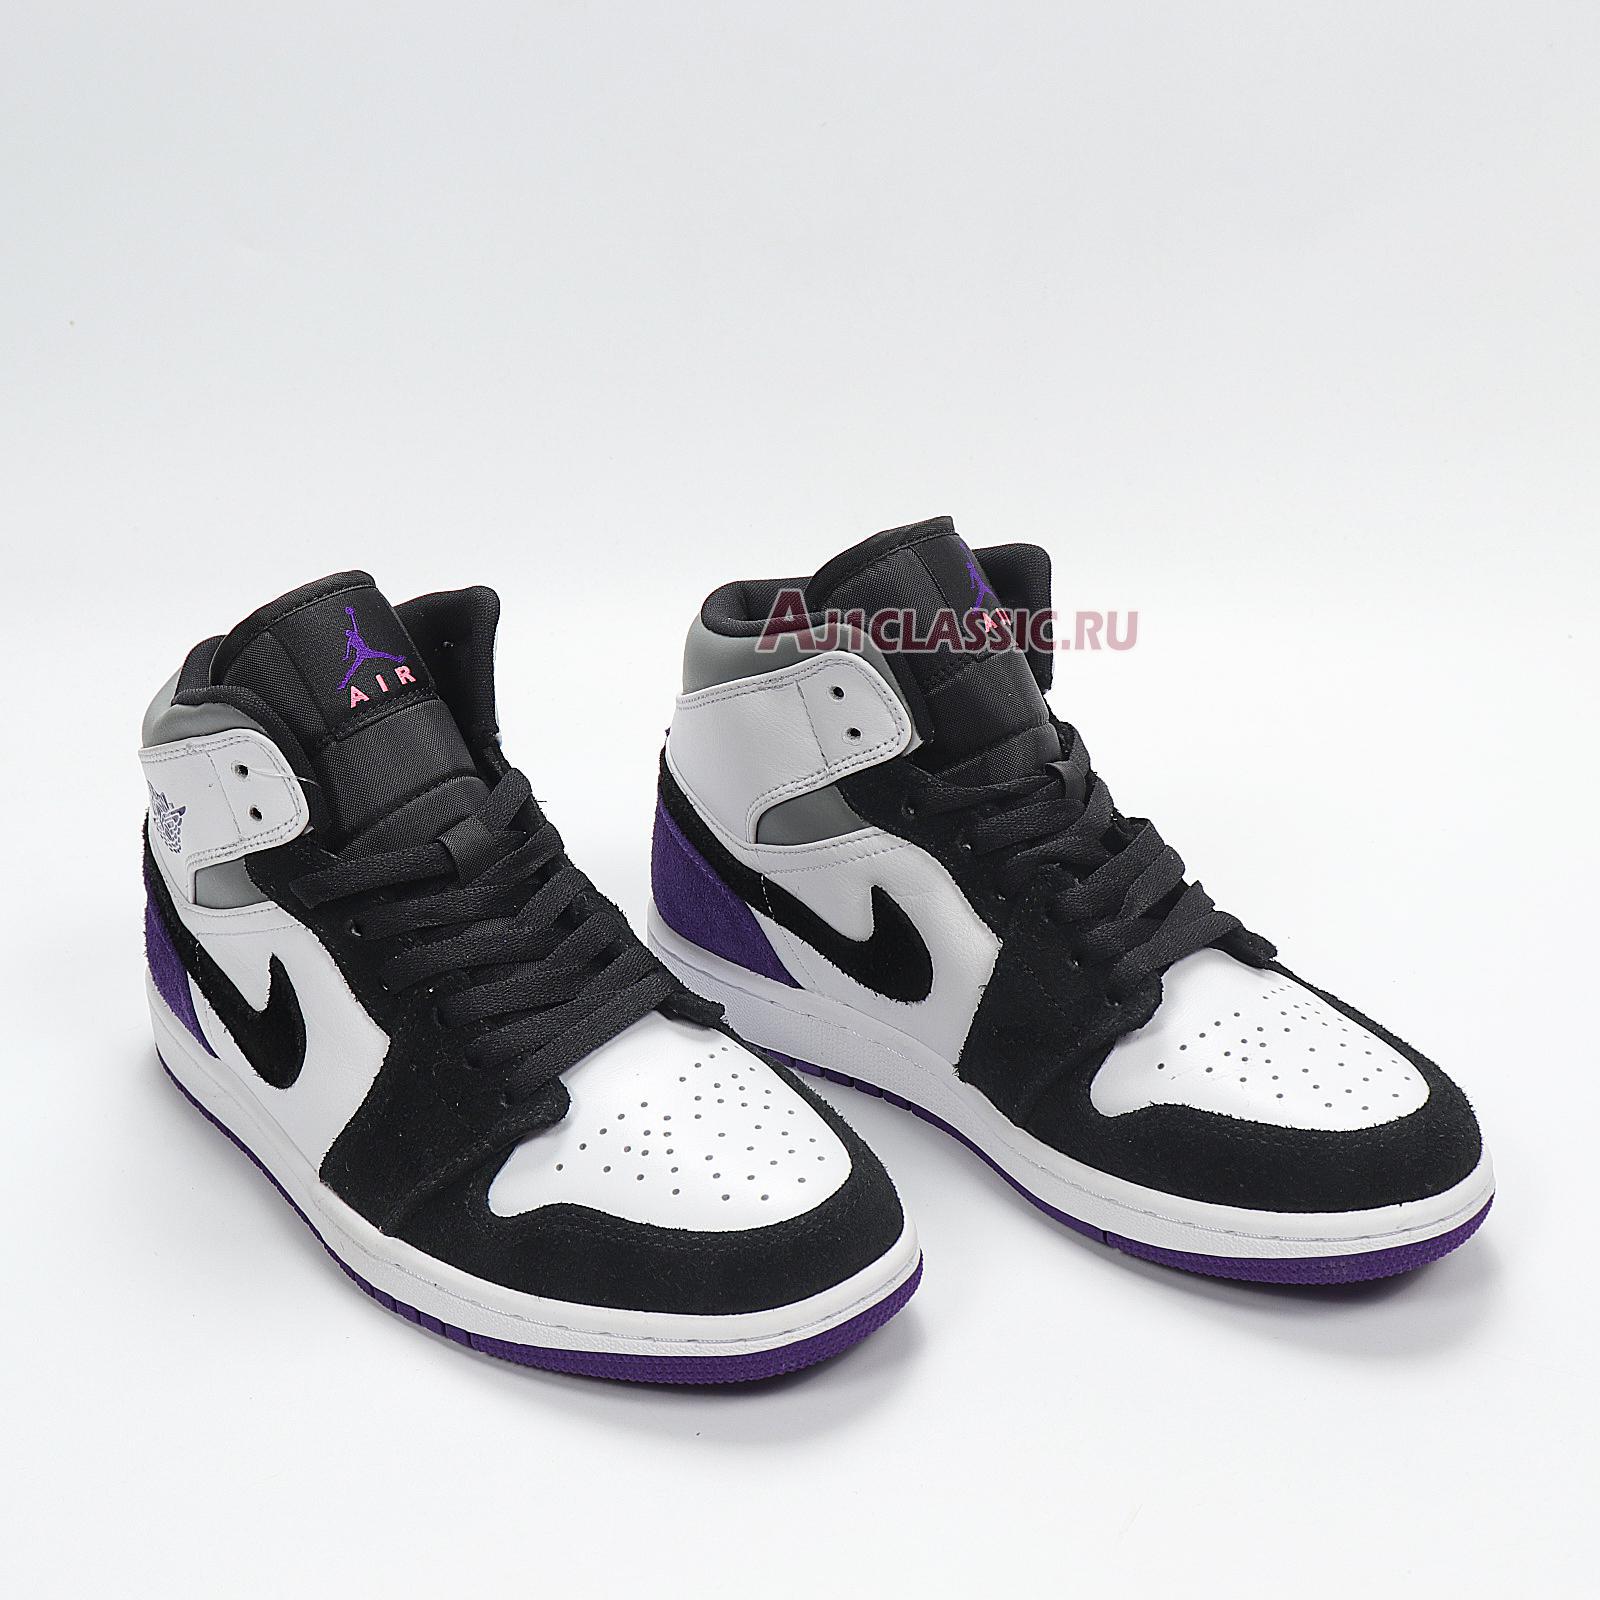 Air Jordan 1 Mid "Surfaces With Purple" 852542-105